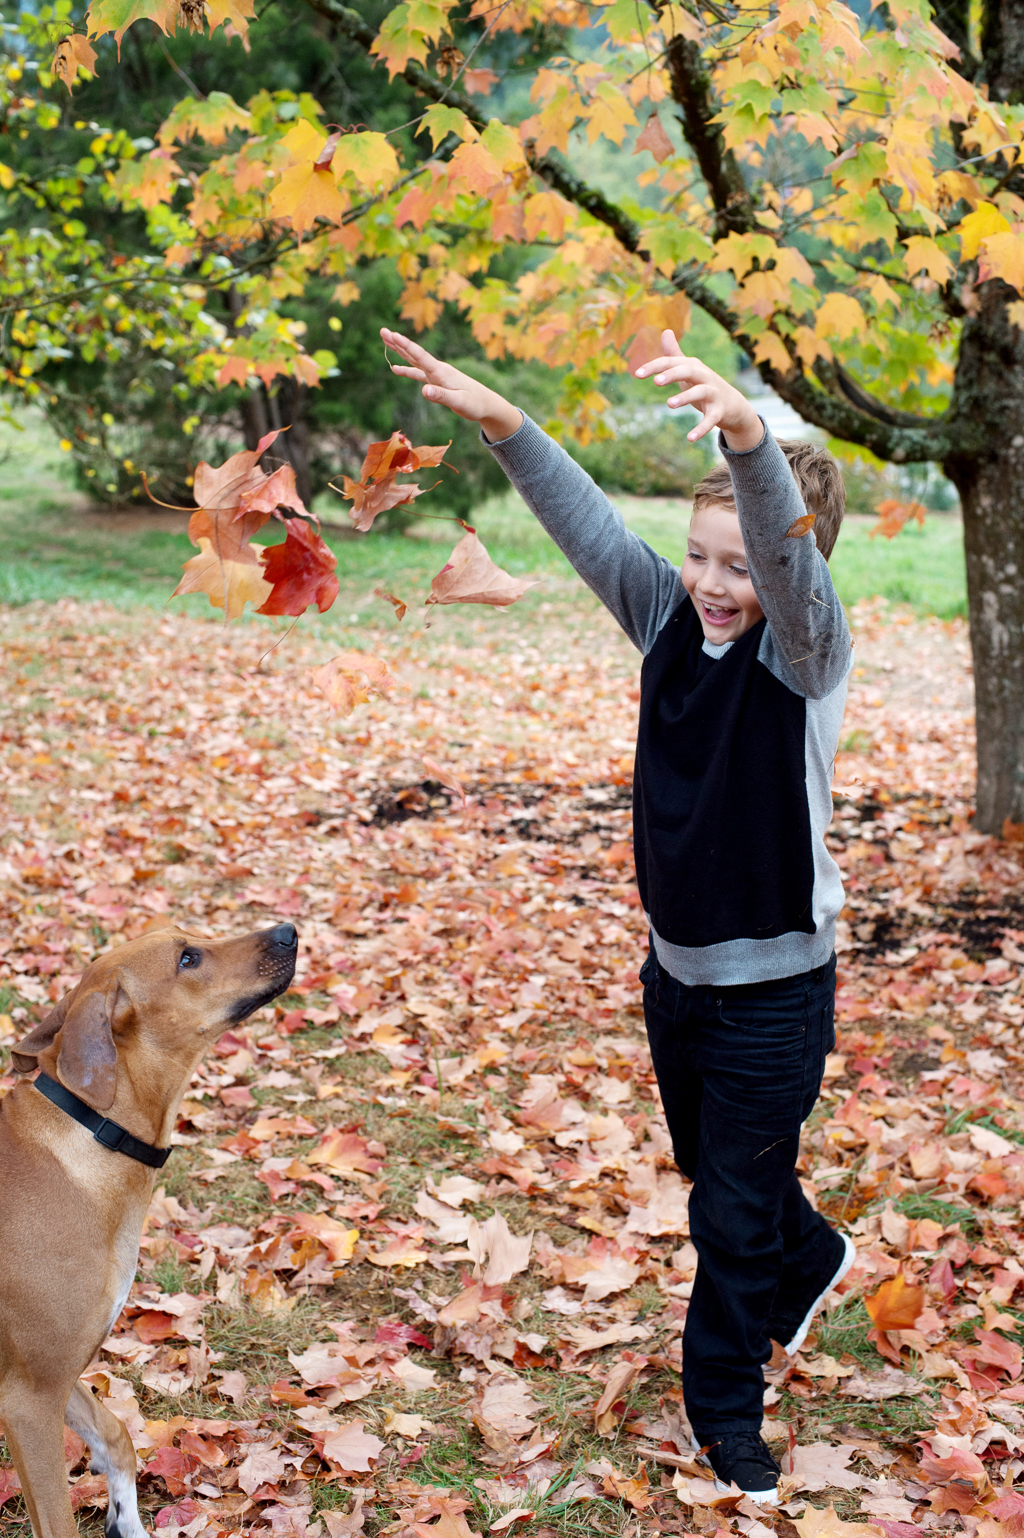 a young boy excitedly throws up fallen leaves in the air while his dog watches